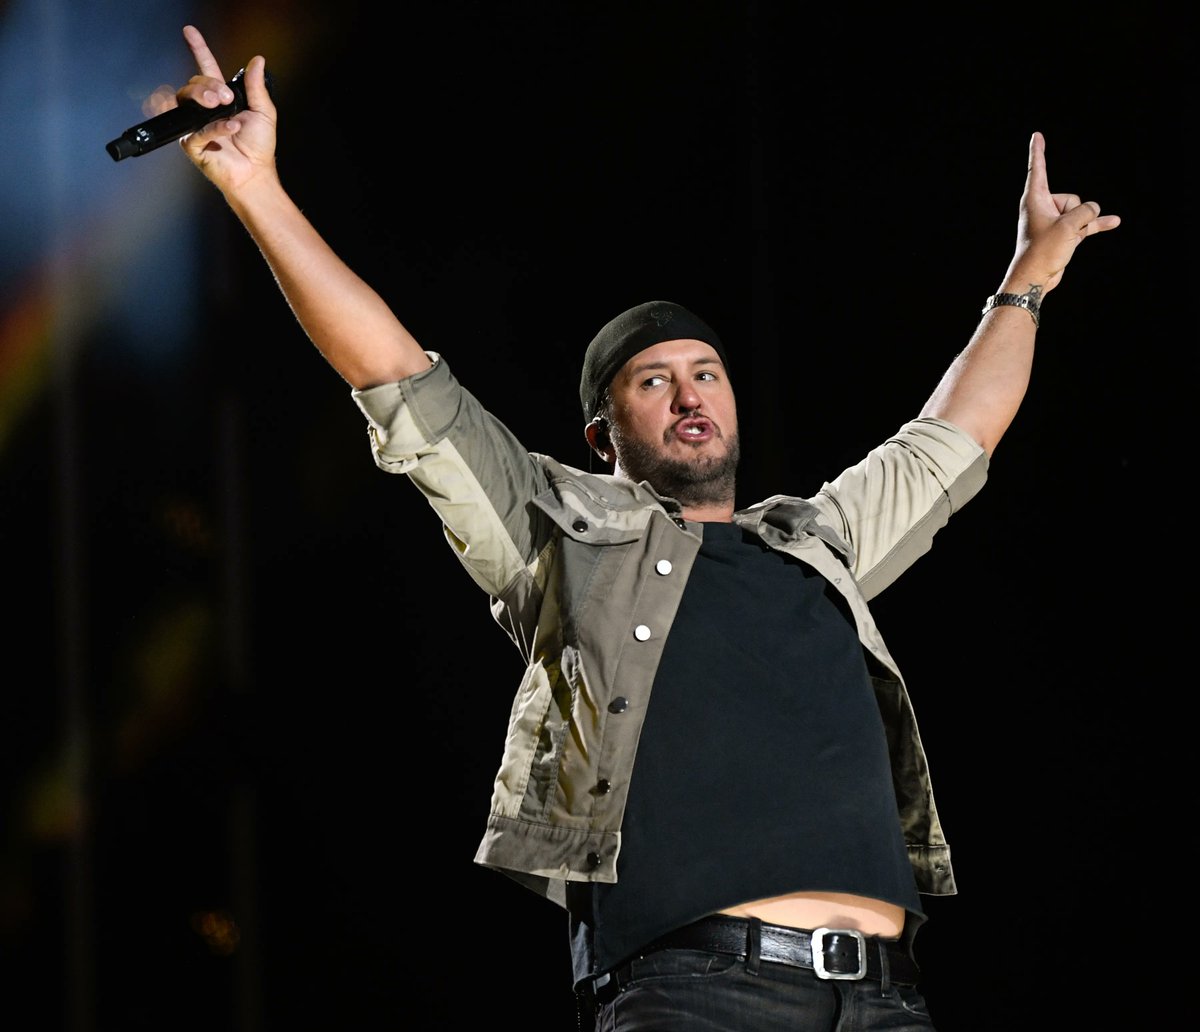 @lukebryan closed out the CMA Fest last Sunday for a fun finale! You can see him live in Cville this autumn! Don't wait, secure your seats today! buff.ly/3Hm9foQ  

#CMA2023 #lukebryan #countrymusic